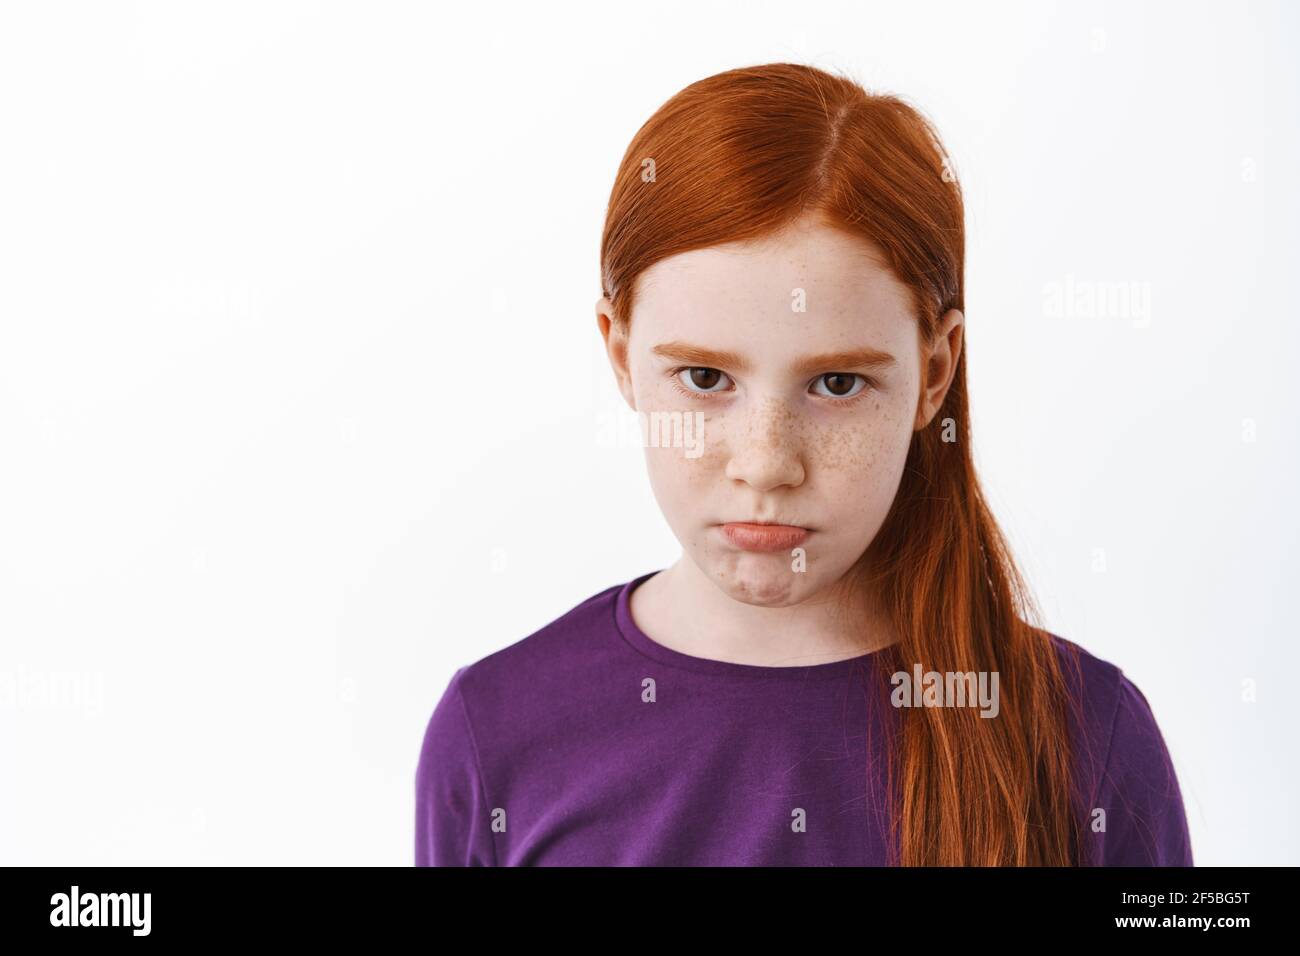 Close up of sad redhead girl with freckles sulking, angry or gloomy looking at camera, being upset or jealous, frowning dipleased, standing over white Stock Photo